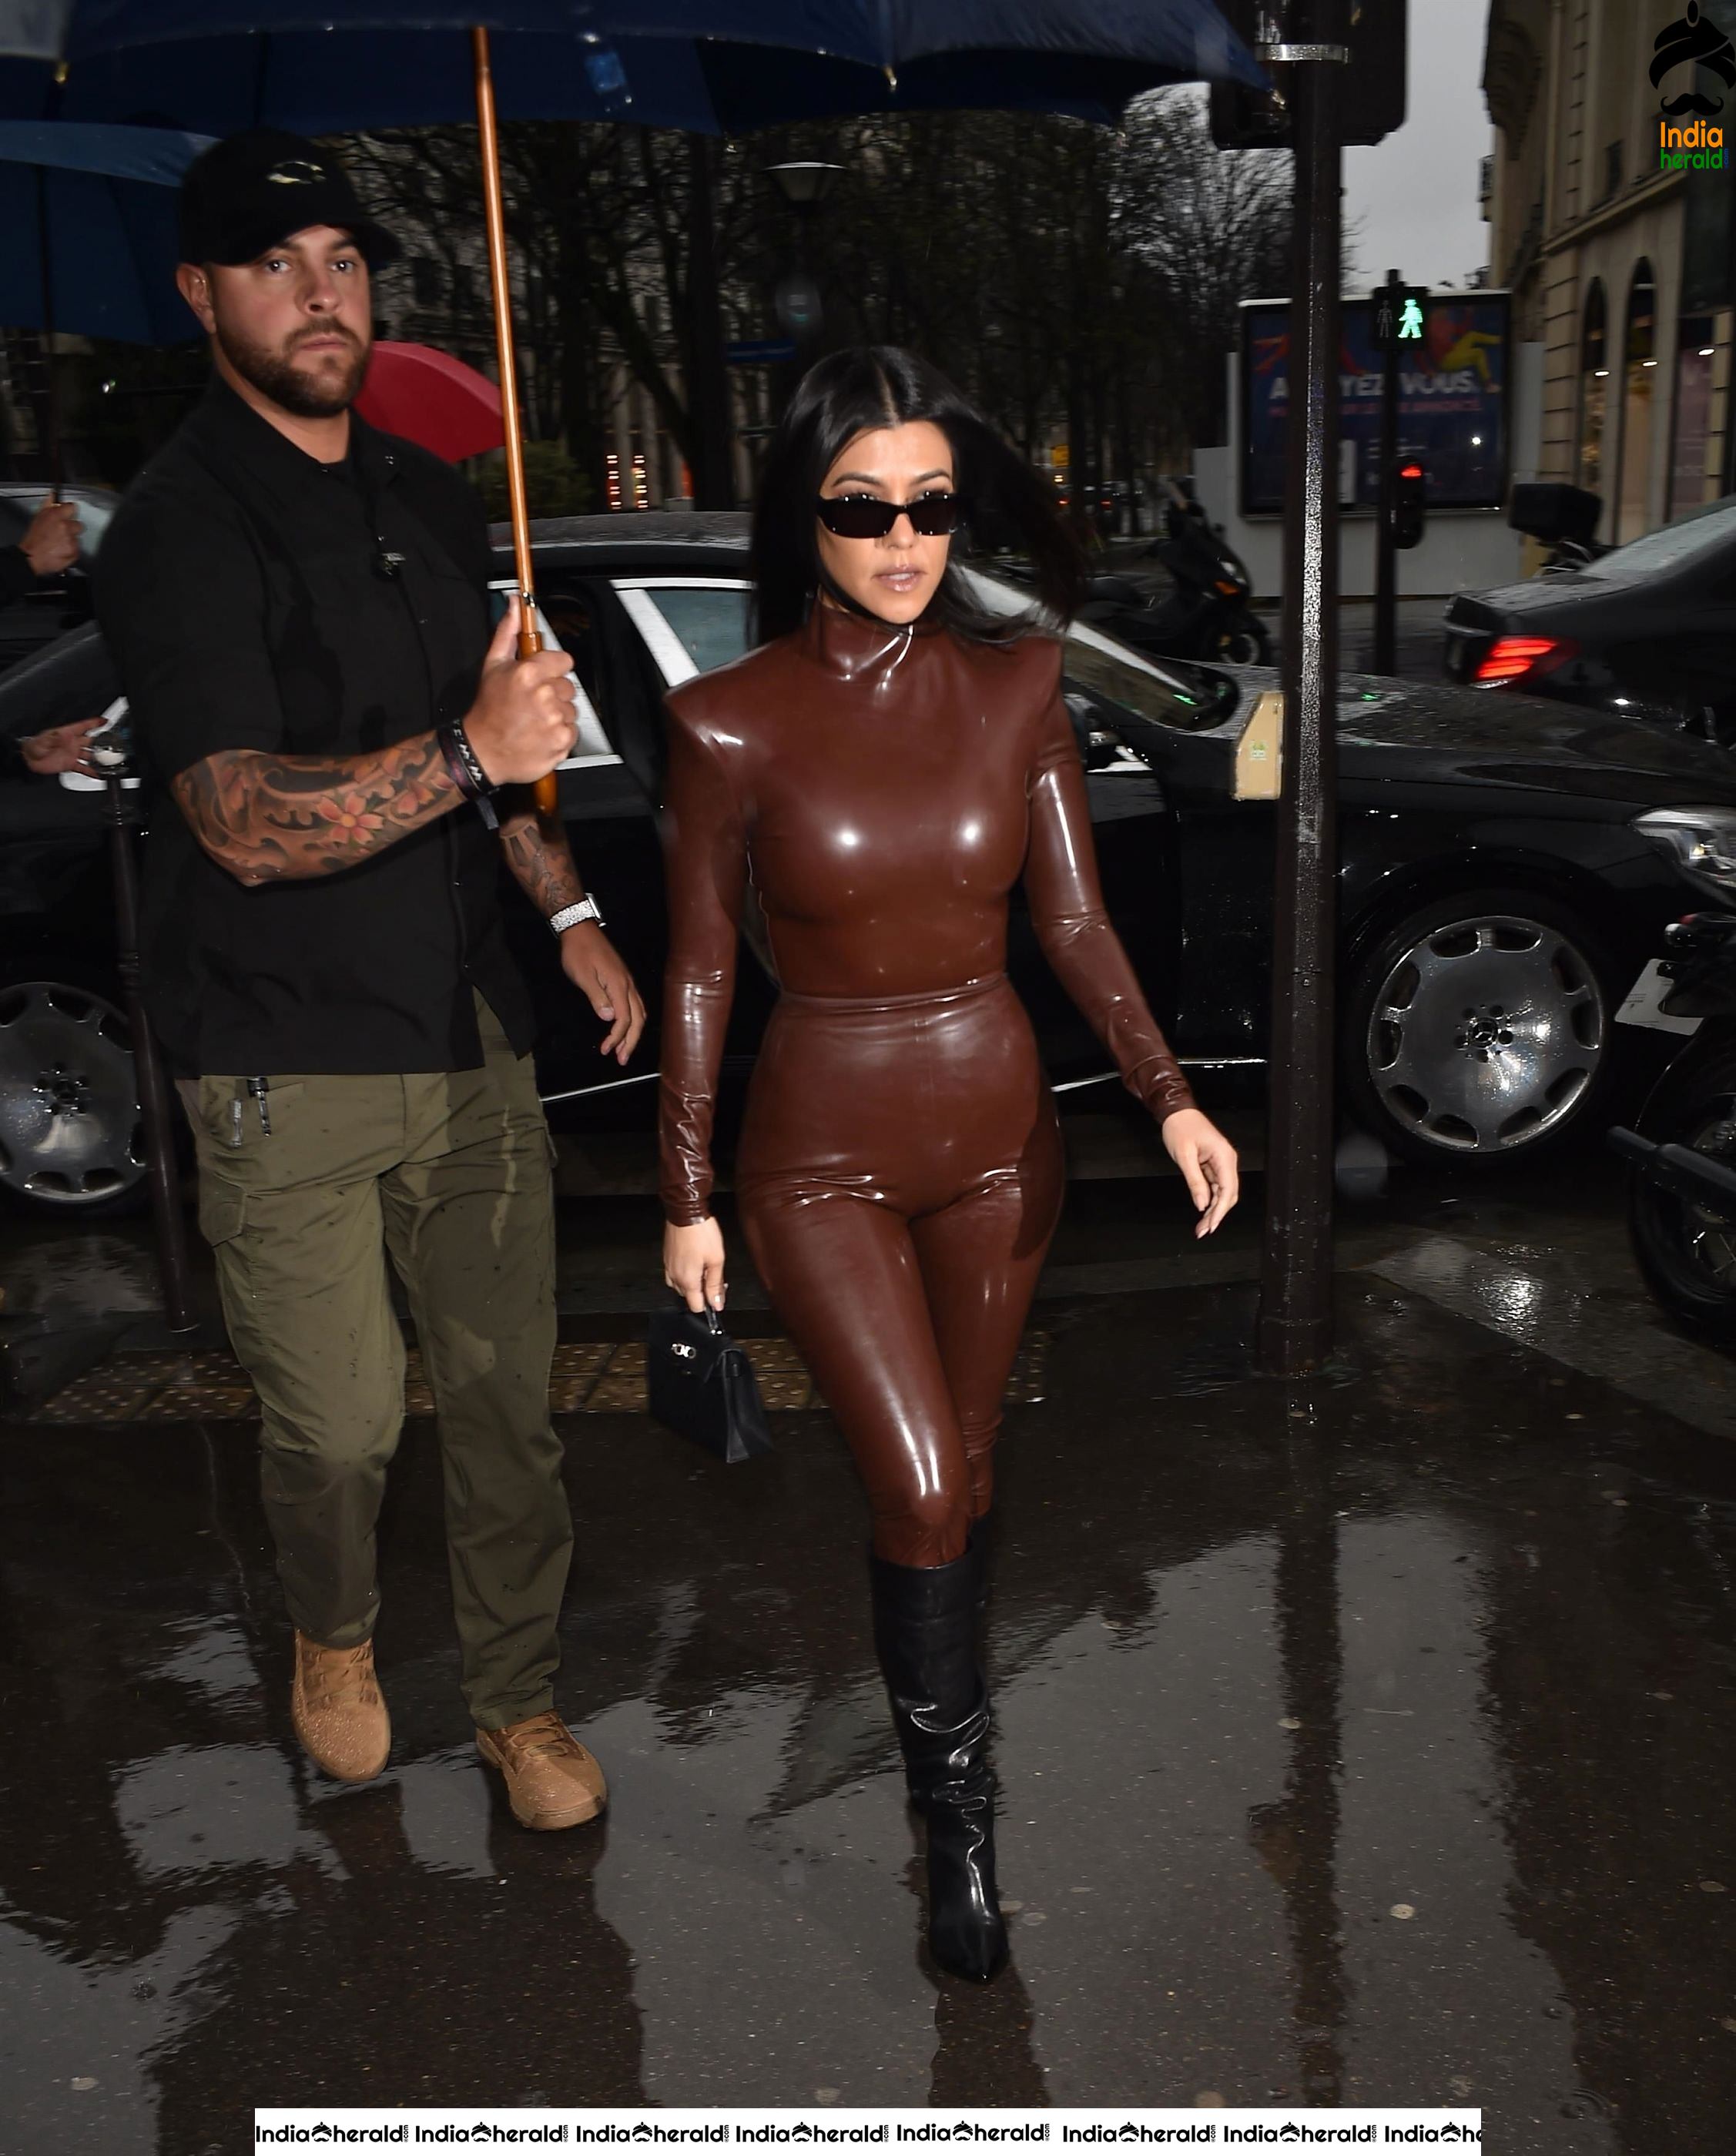 Kourtney Kardashian in a Sexy Latex Outfit seen leaving Church after Sunday Service